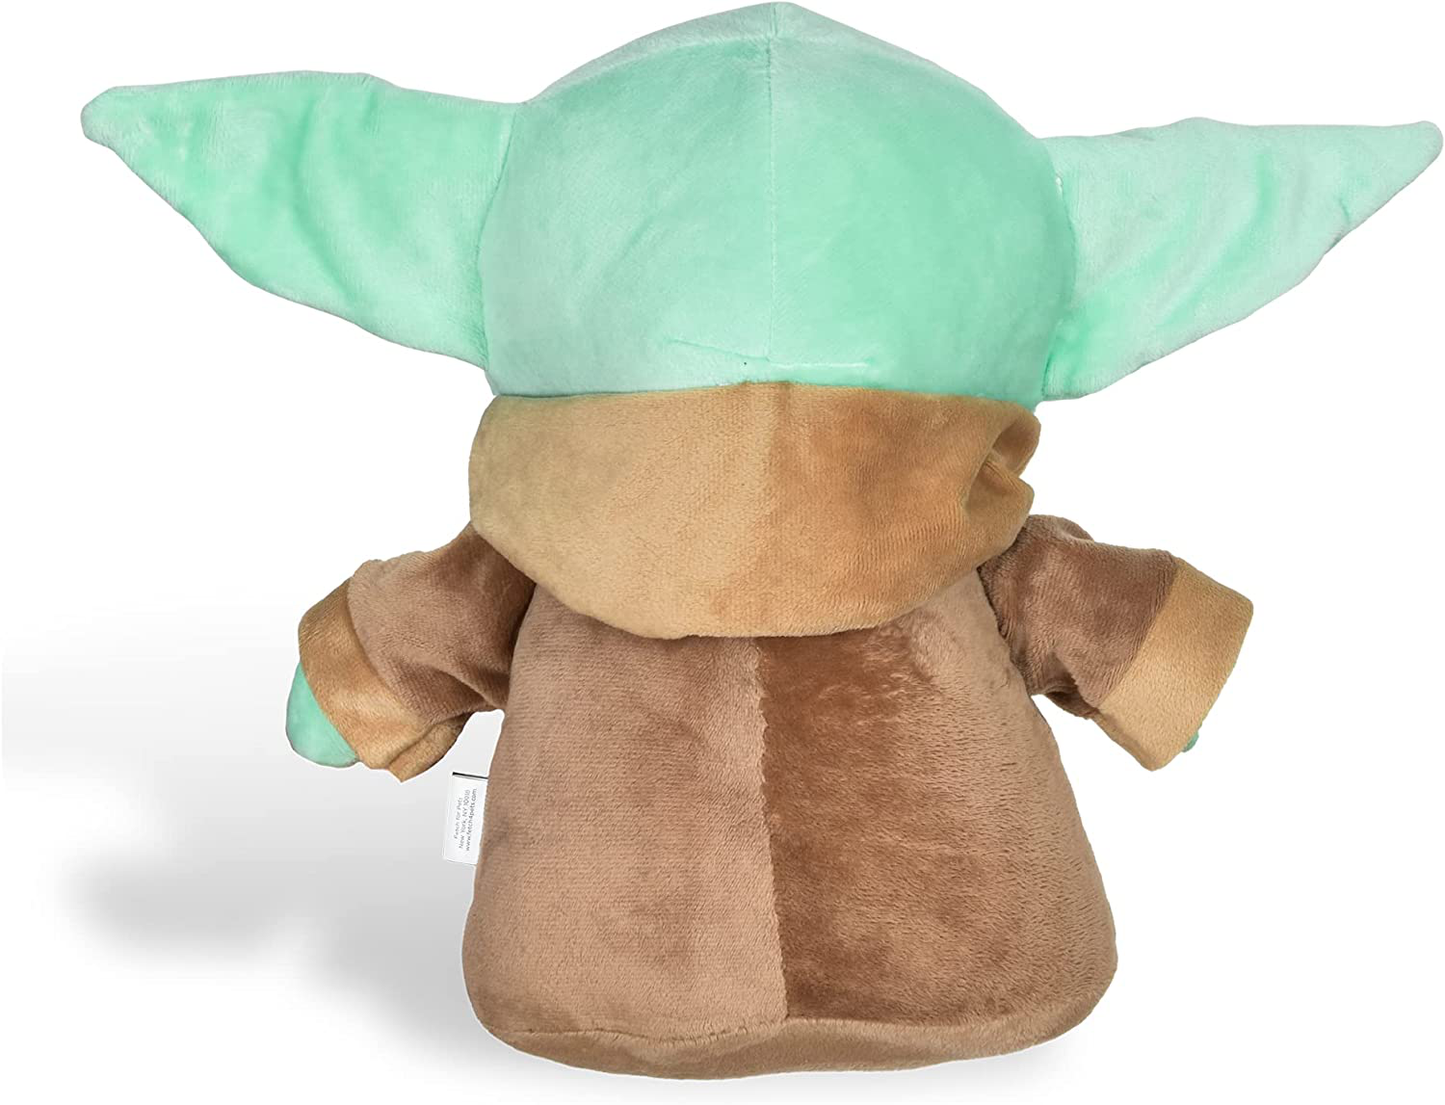 STAR WARS Mandalorian the Child Plush Figure Dog Toy - 6 Inch, 9 Inch, or 12 Inch Dog Toy from the Mandalorian - Soft and Plush Dog Toys Safe Fabric Squeaky Dog Toy for All Dogs - Baby Yoda Dog Toy Animals & Pet Supplies > Pet Supplies > Dog Supplies > Dog Toys Fetch for Pets   